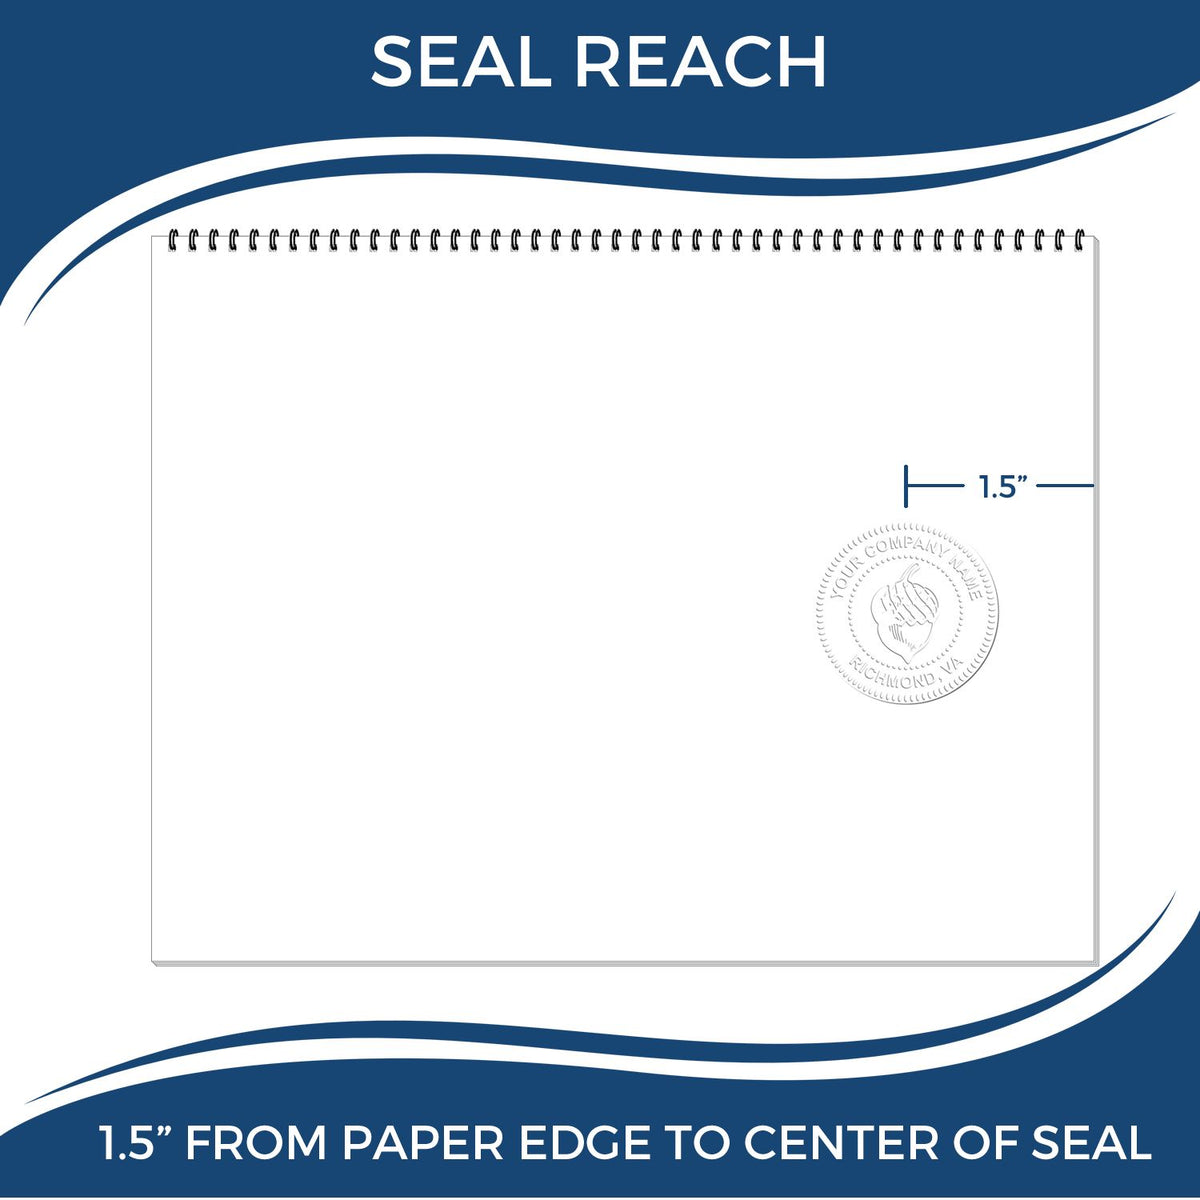 An infographic showing the seal reach which is represented by a ruler and a miniature seal image of the Soft Arizona Professional Engineer Seal